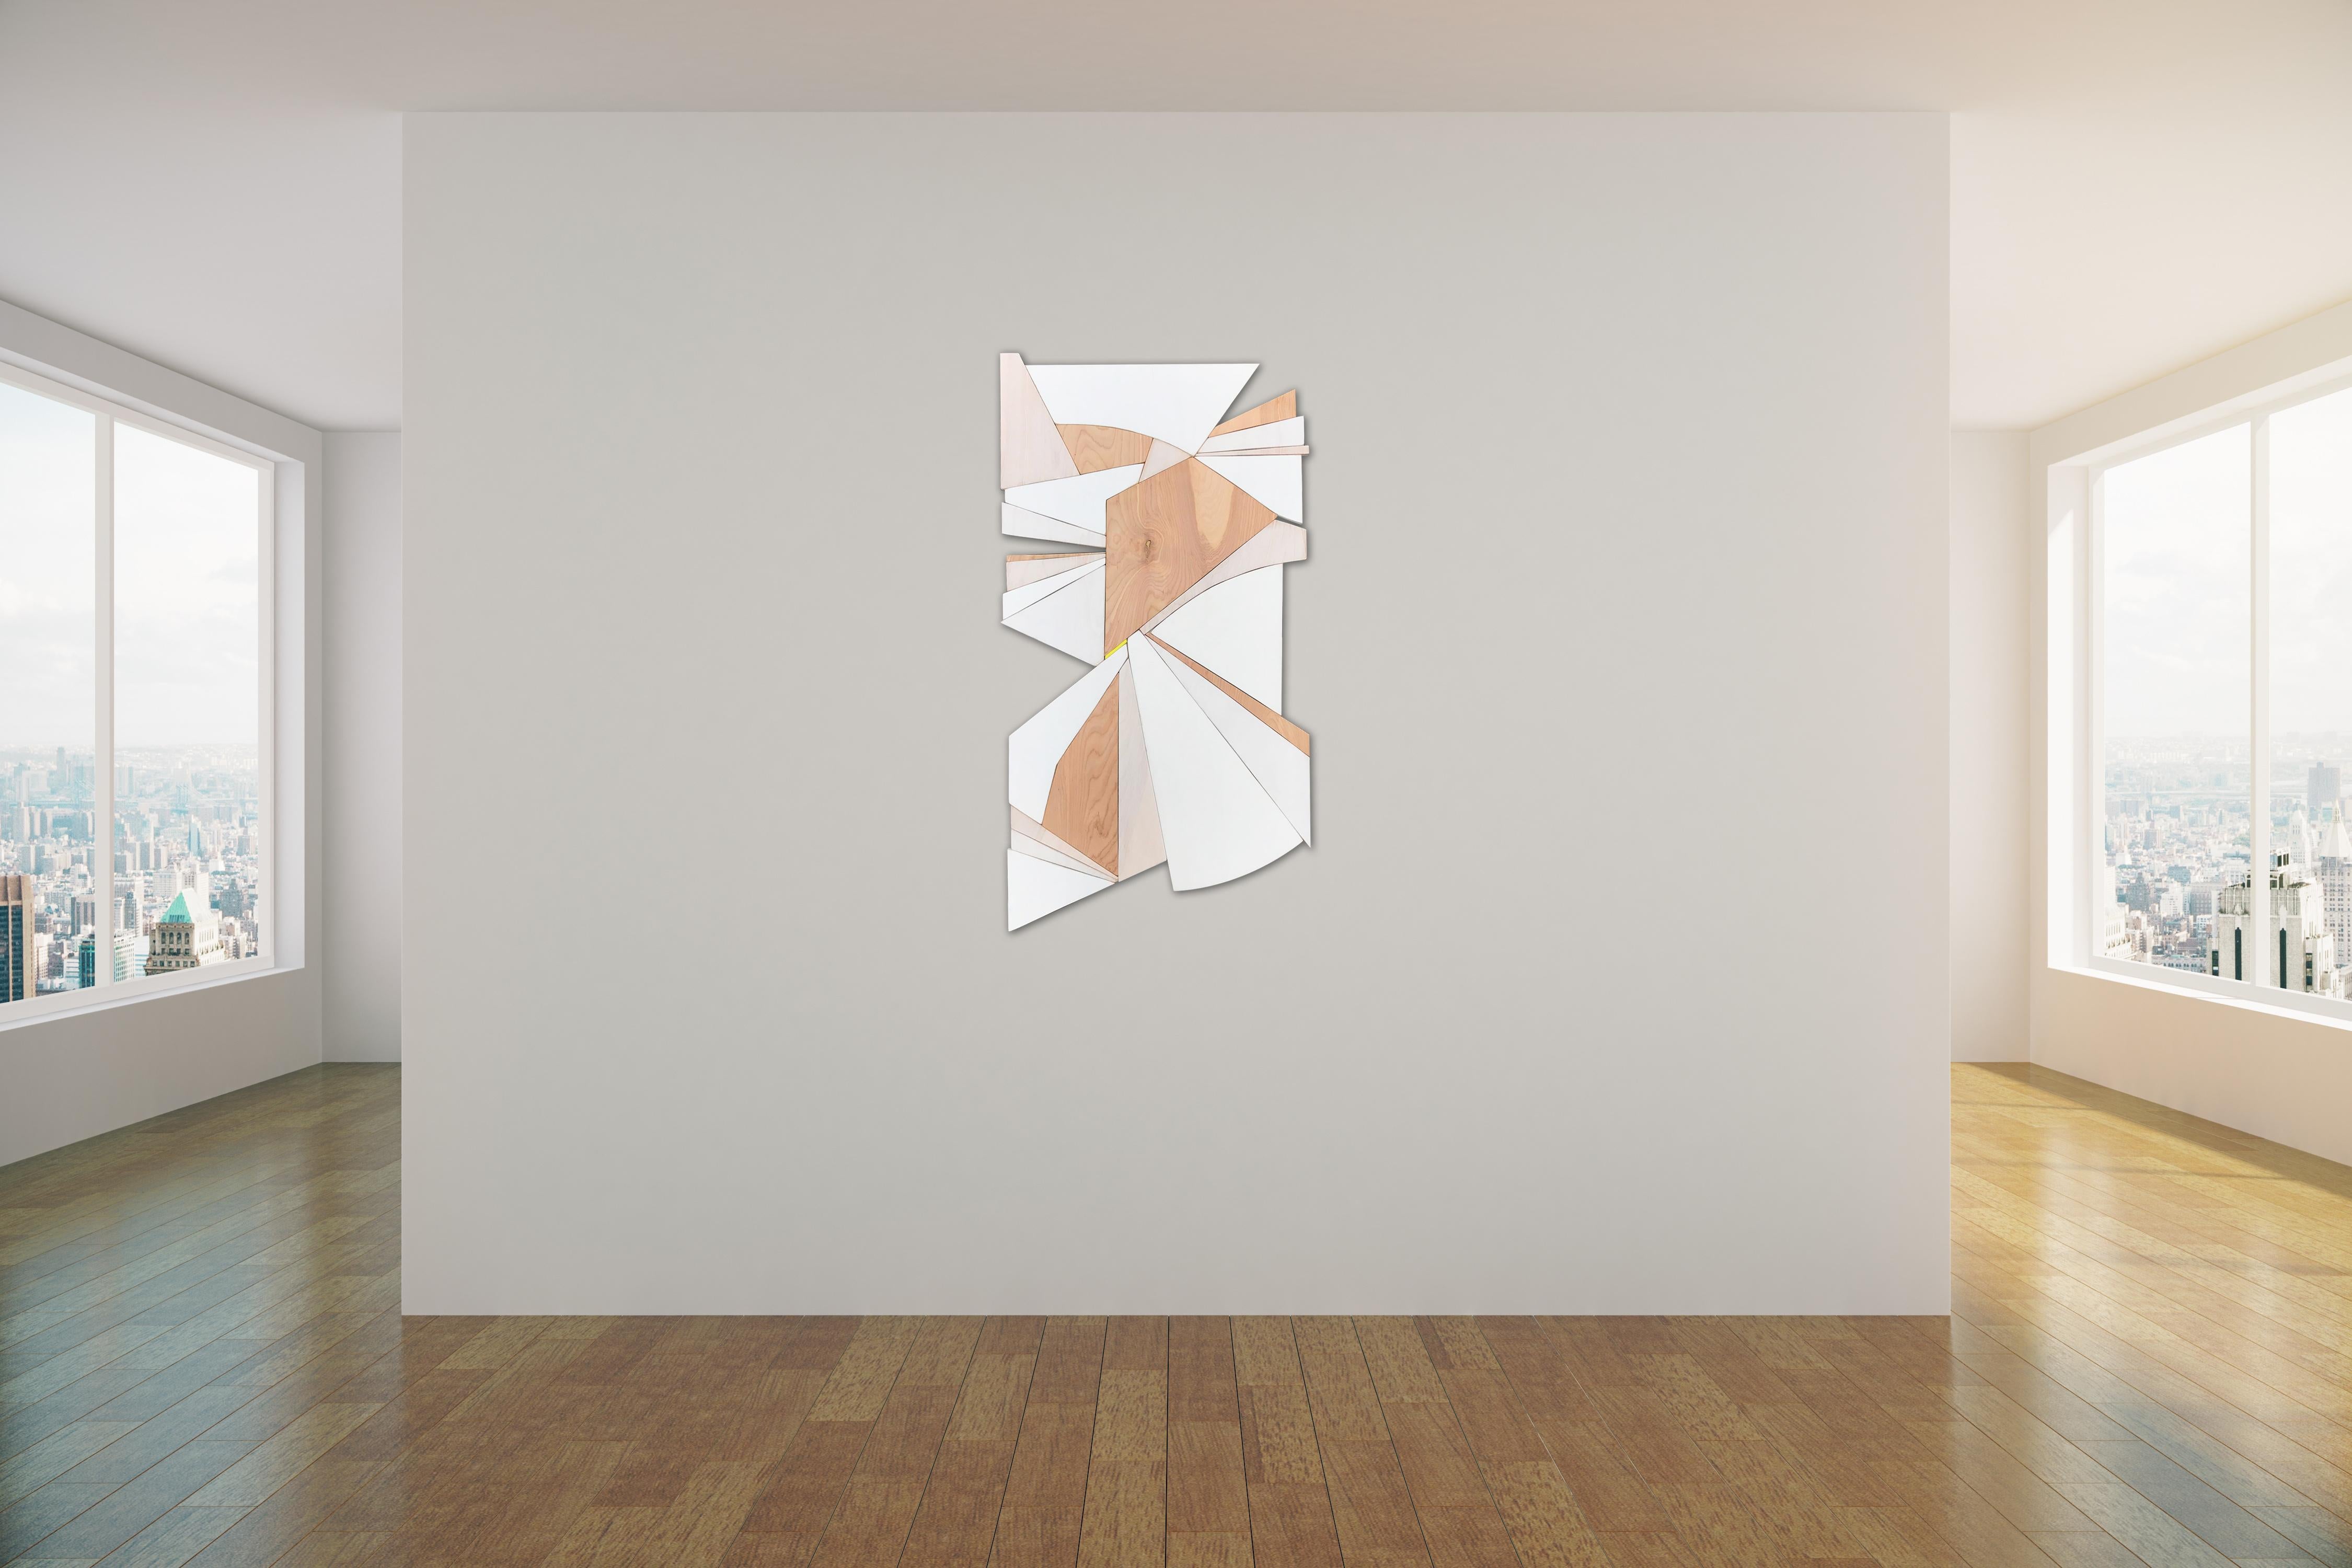 
Trapeze3 is a discreet and elegant, minimalist, monochromatic, contemporary wall sculpture. It is constructed with birch panels, acrylic washes and completed with a satin lacquer finish. The paint is slightly distressed giving the piece more